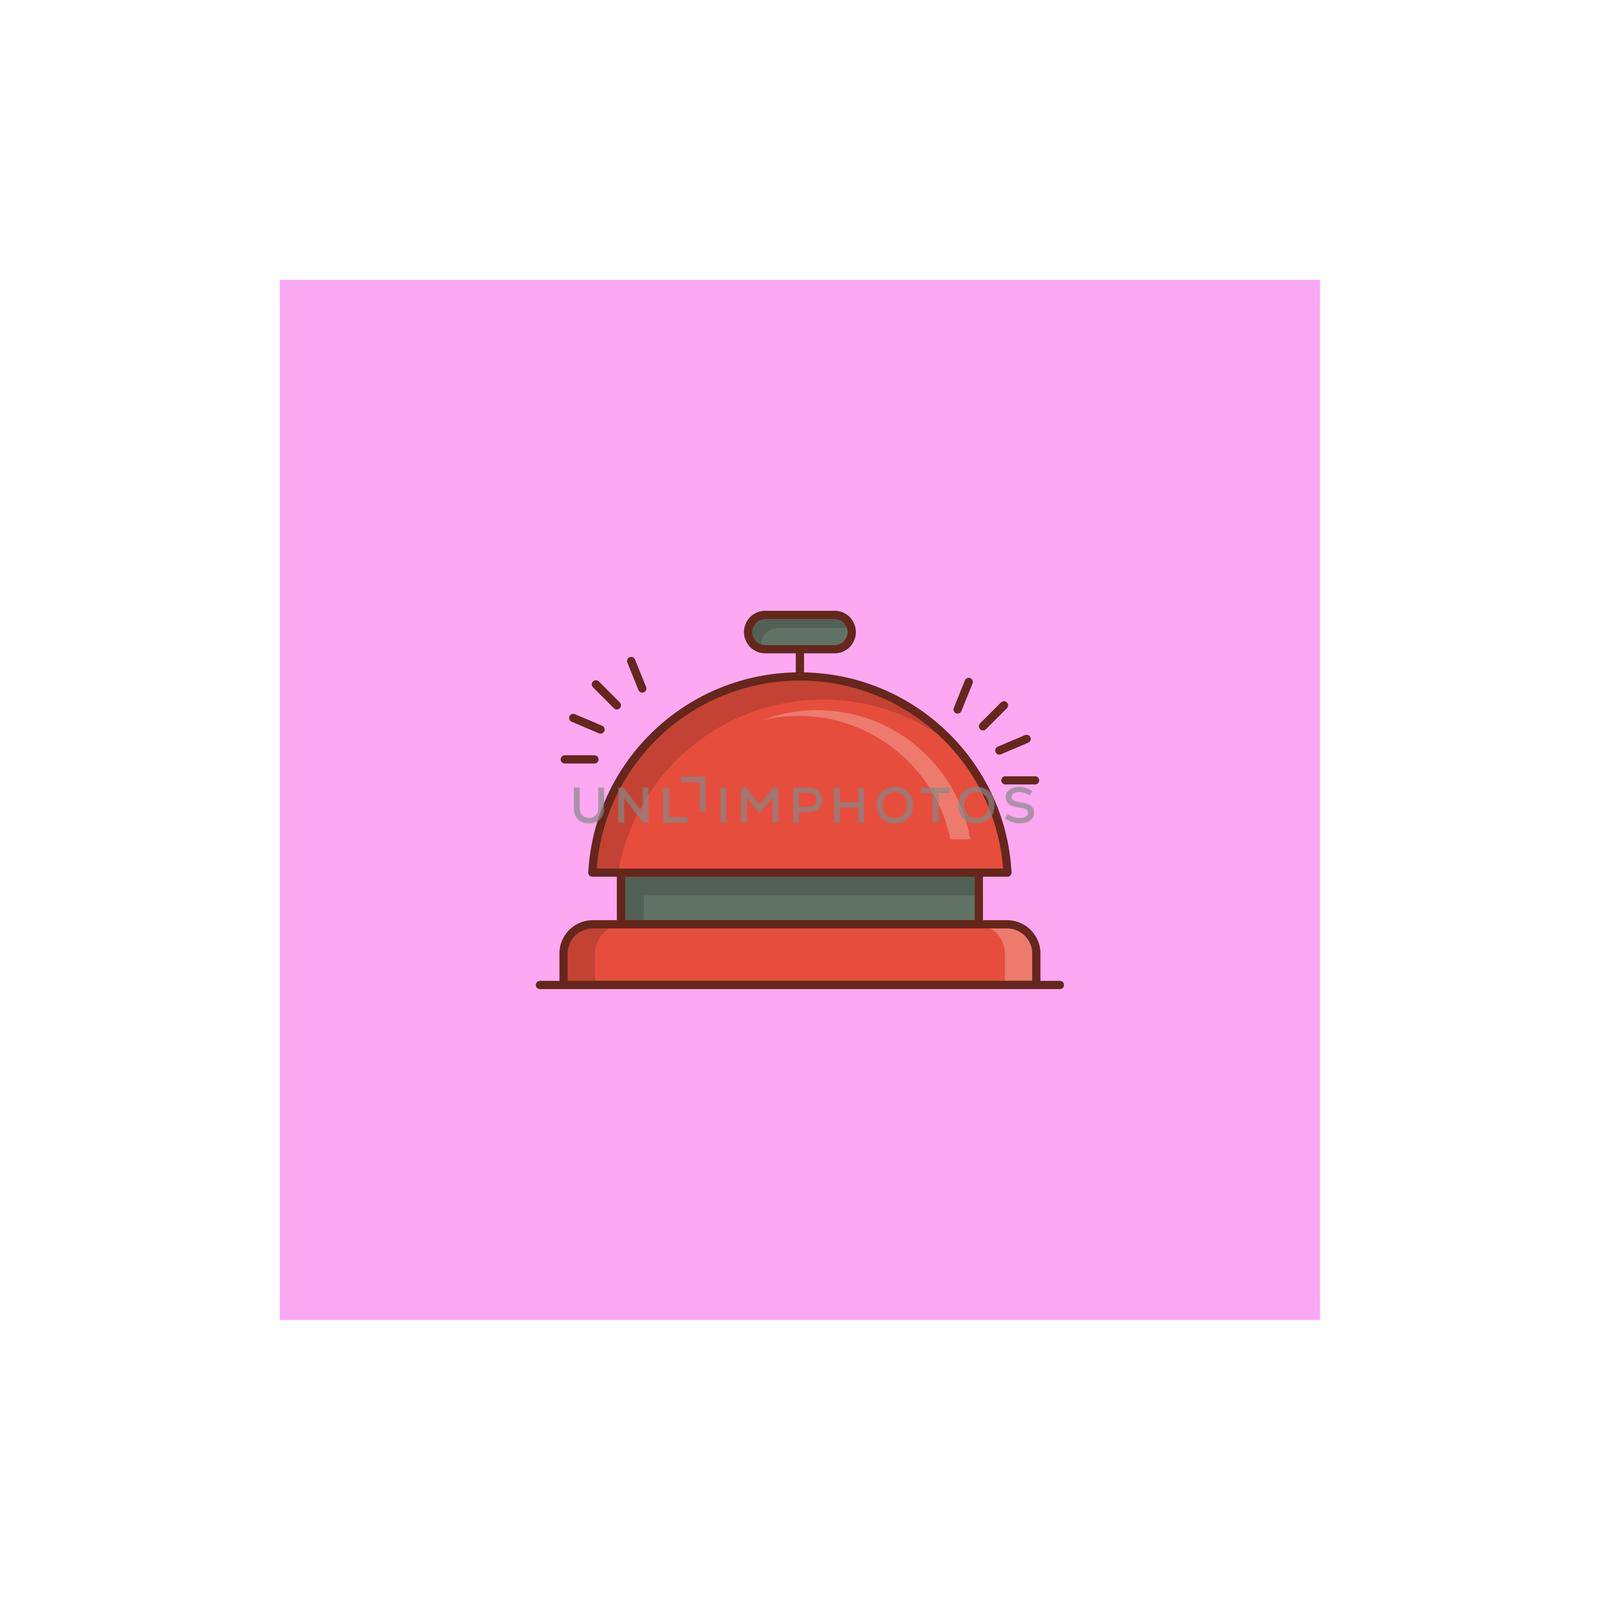 bell by FlaticonsDesign